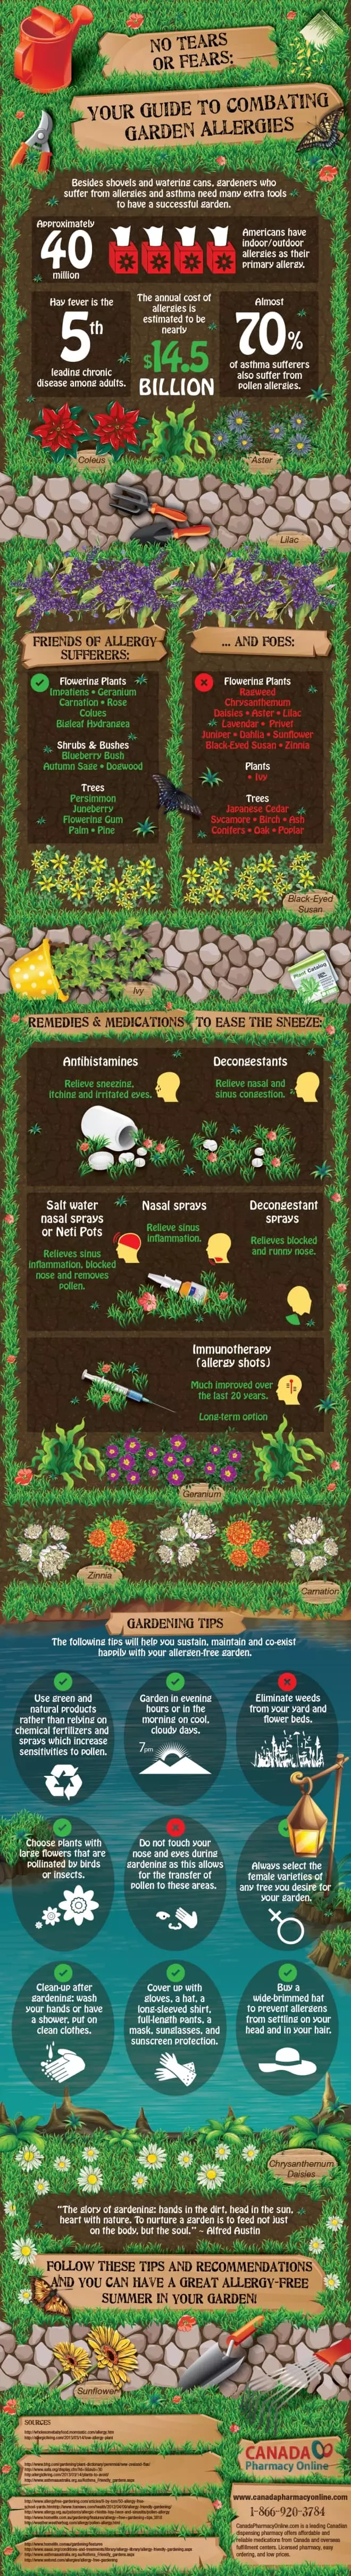 Your Guide to Combating Garden Allergies